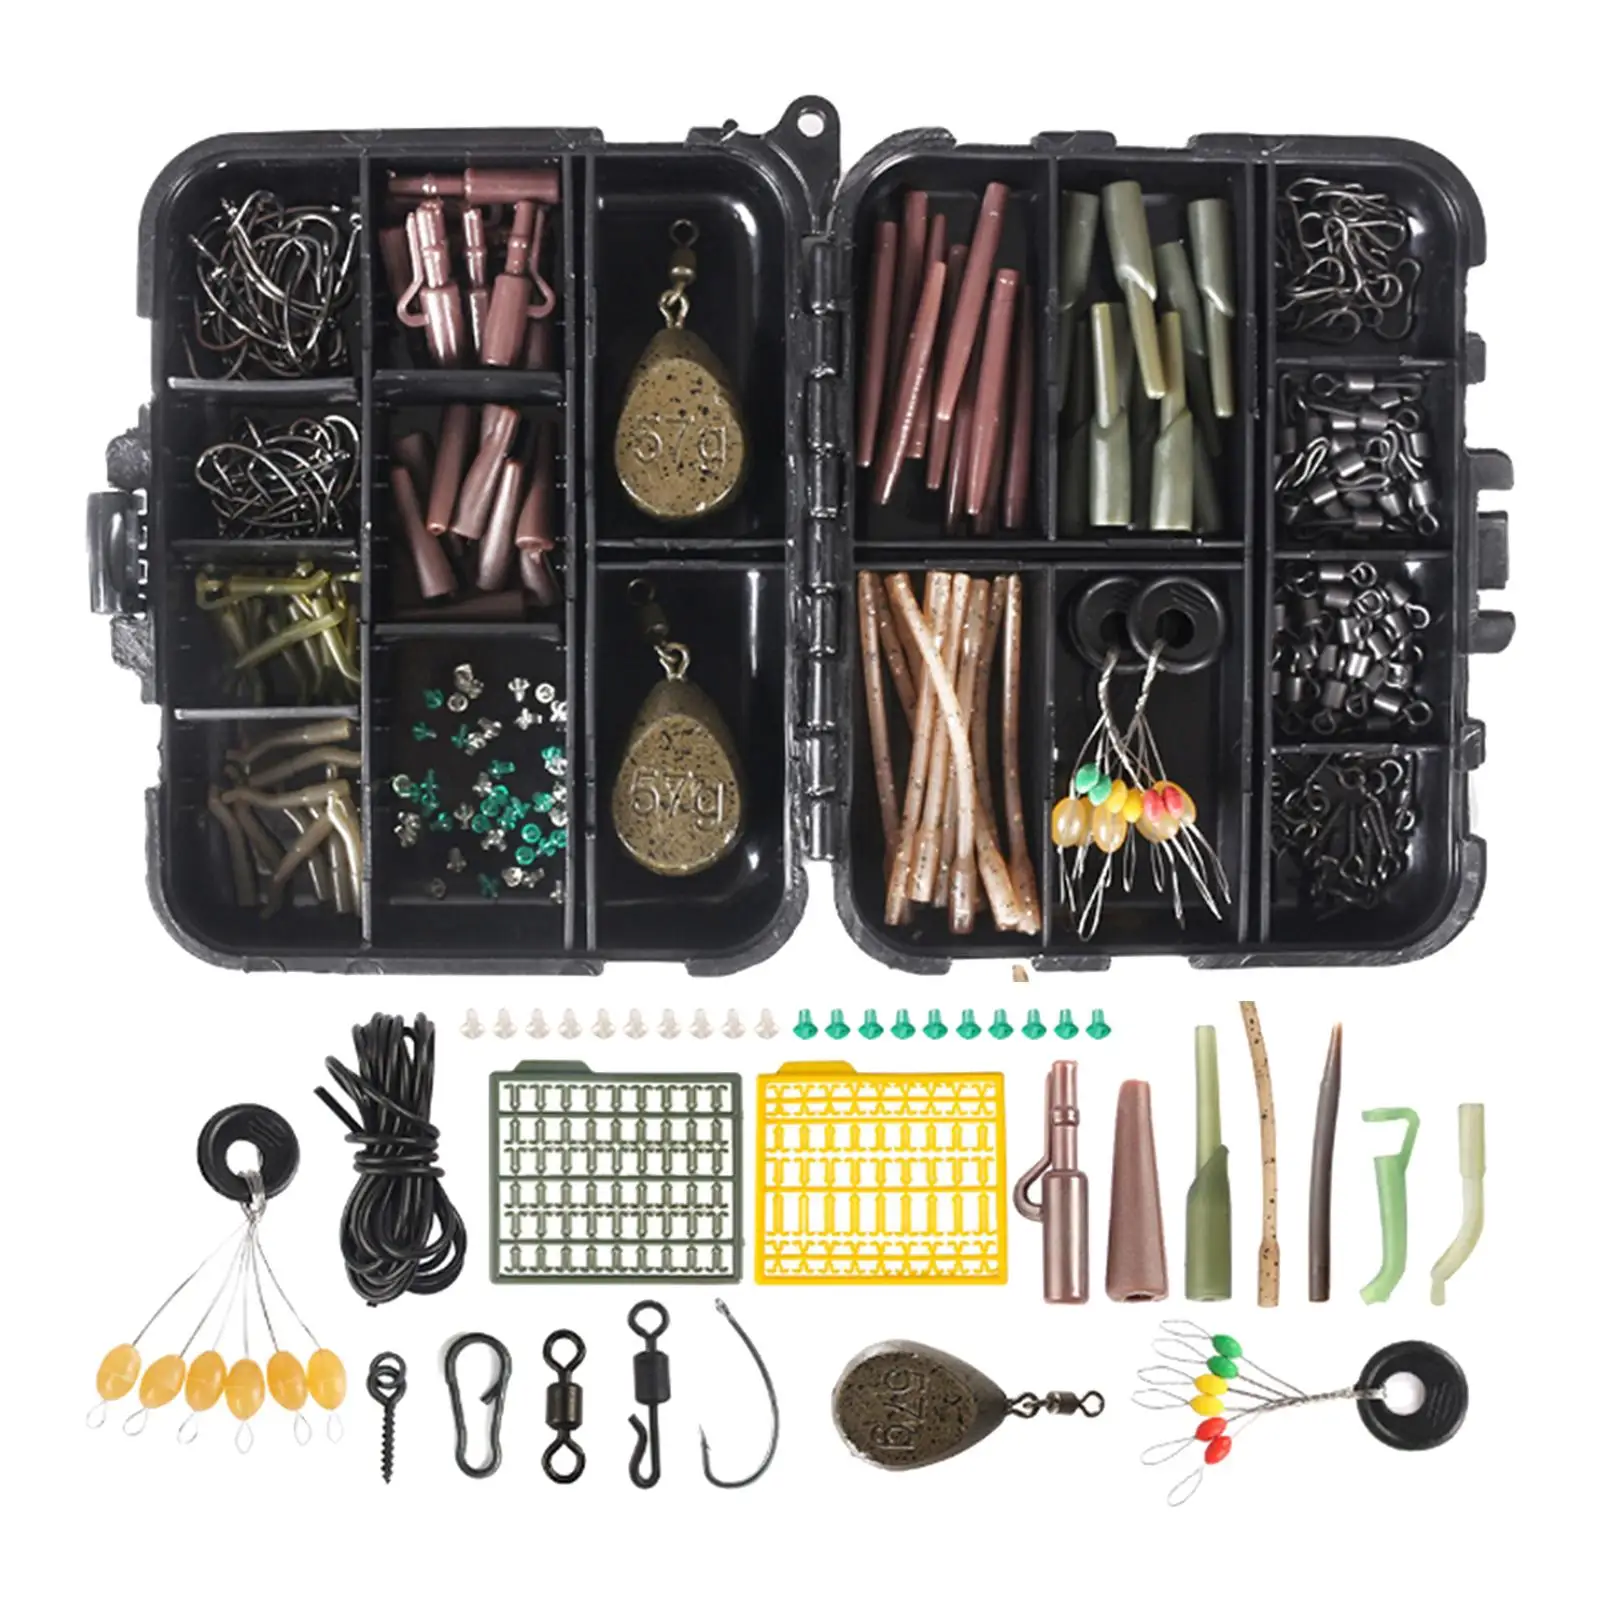 Fishing Accessories Set Portable Equipment Gear Sinker Weights Space Beans for Outdoor Fishing Carp Baits Rigs Carp Fishing